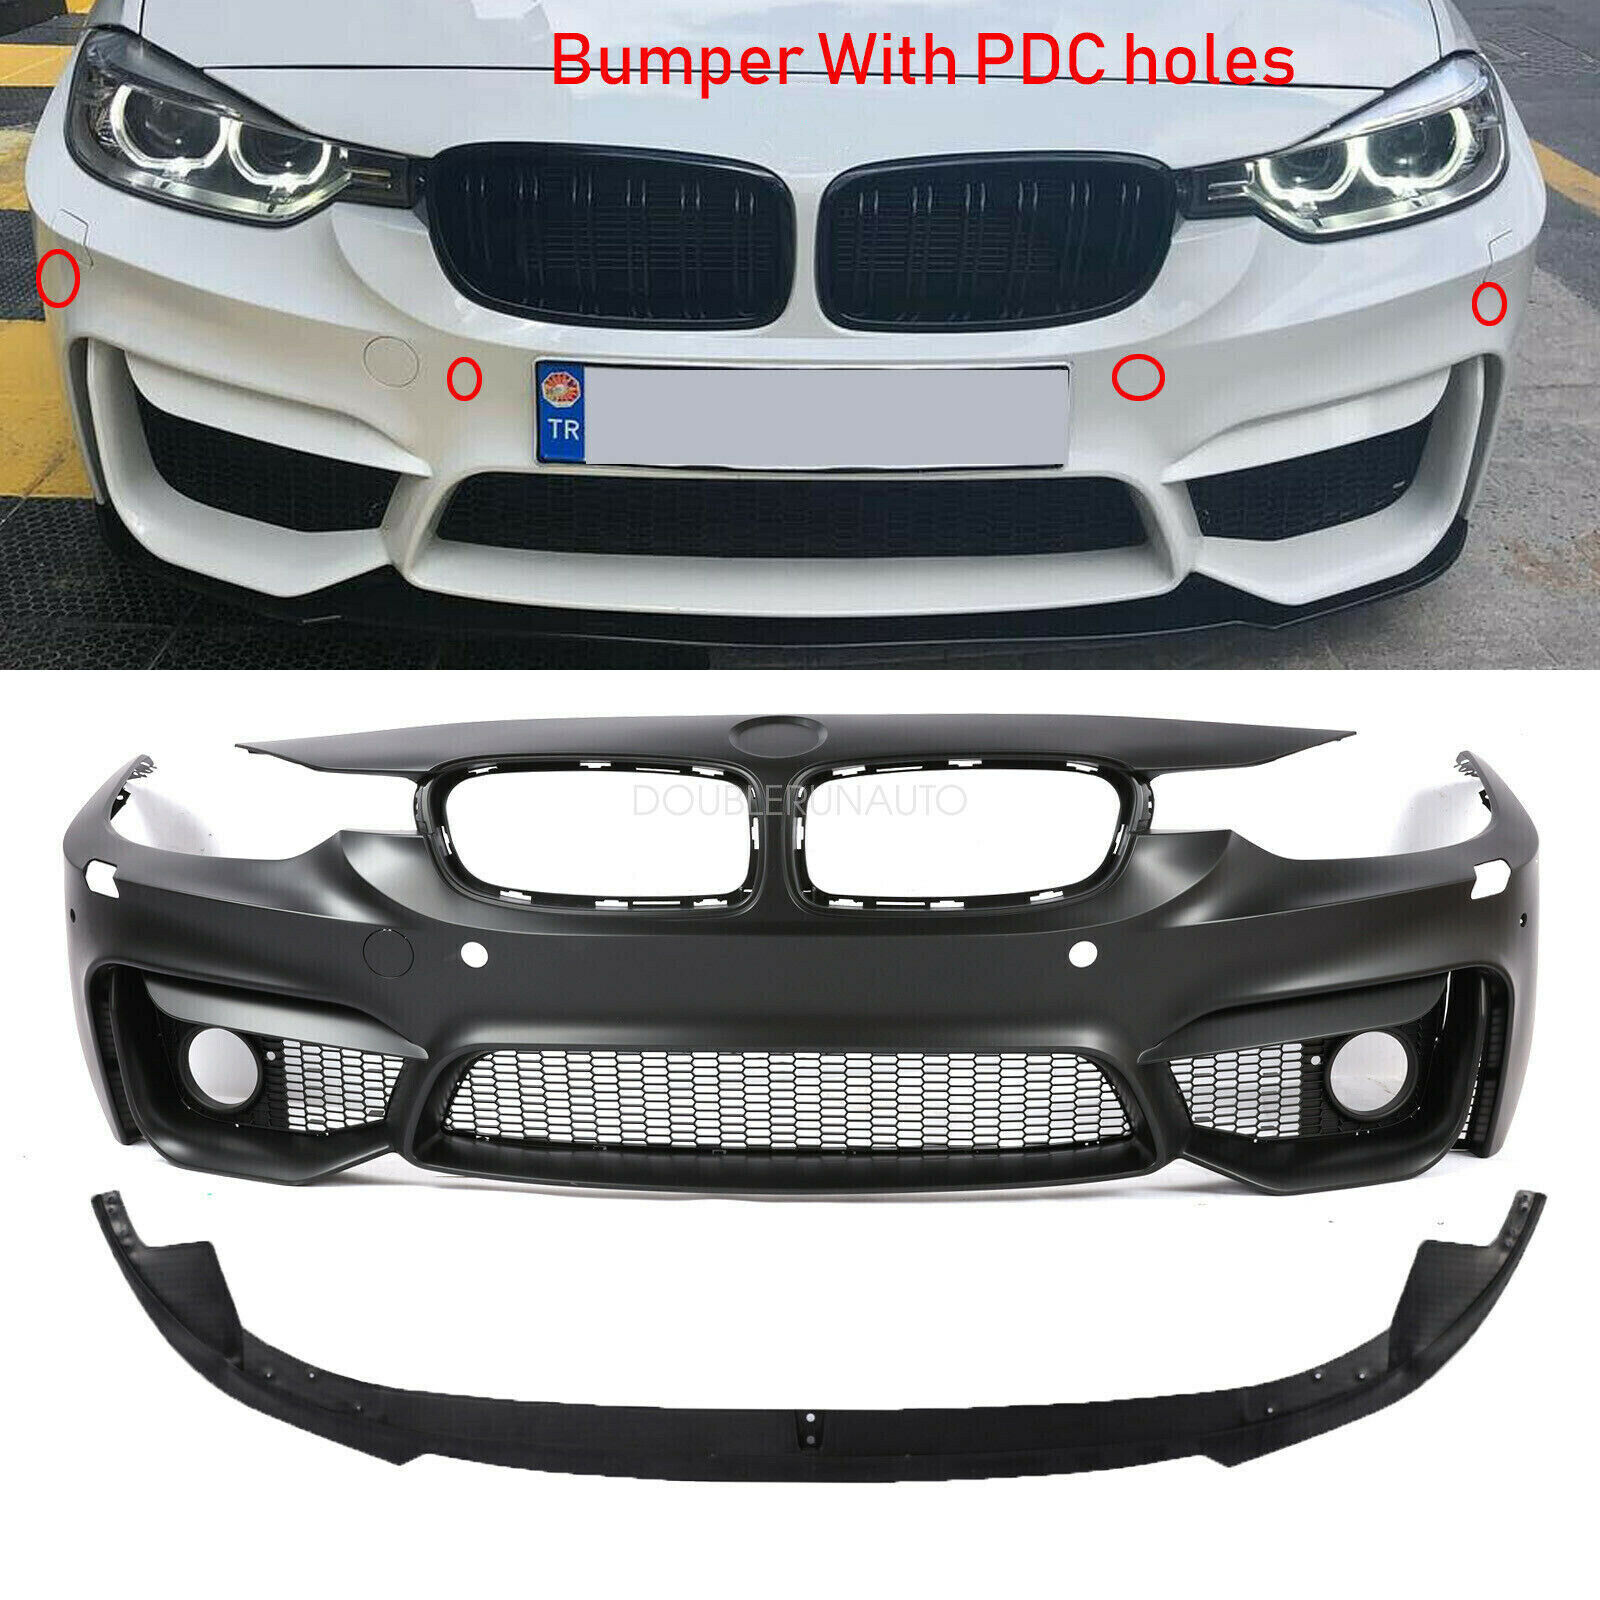 2012-18 F80 M3 Style Font Bumper FOR BMW F30 F31 3 SERIES  W/ PDC